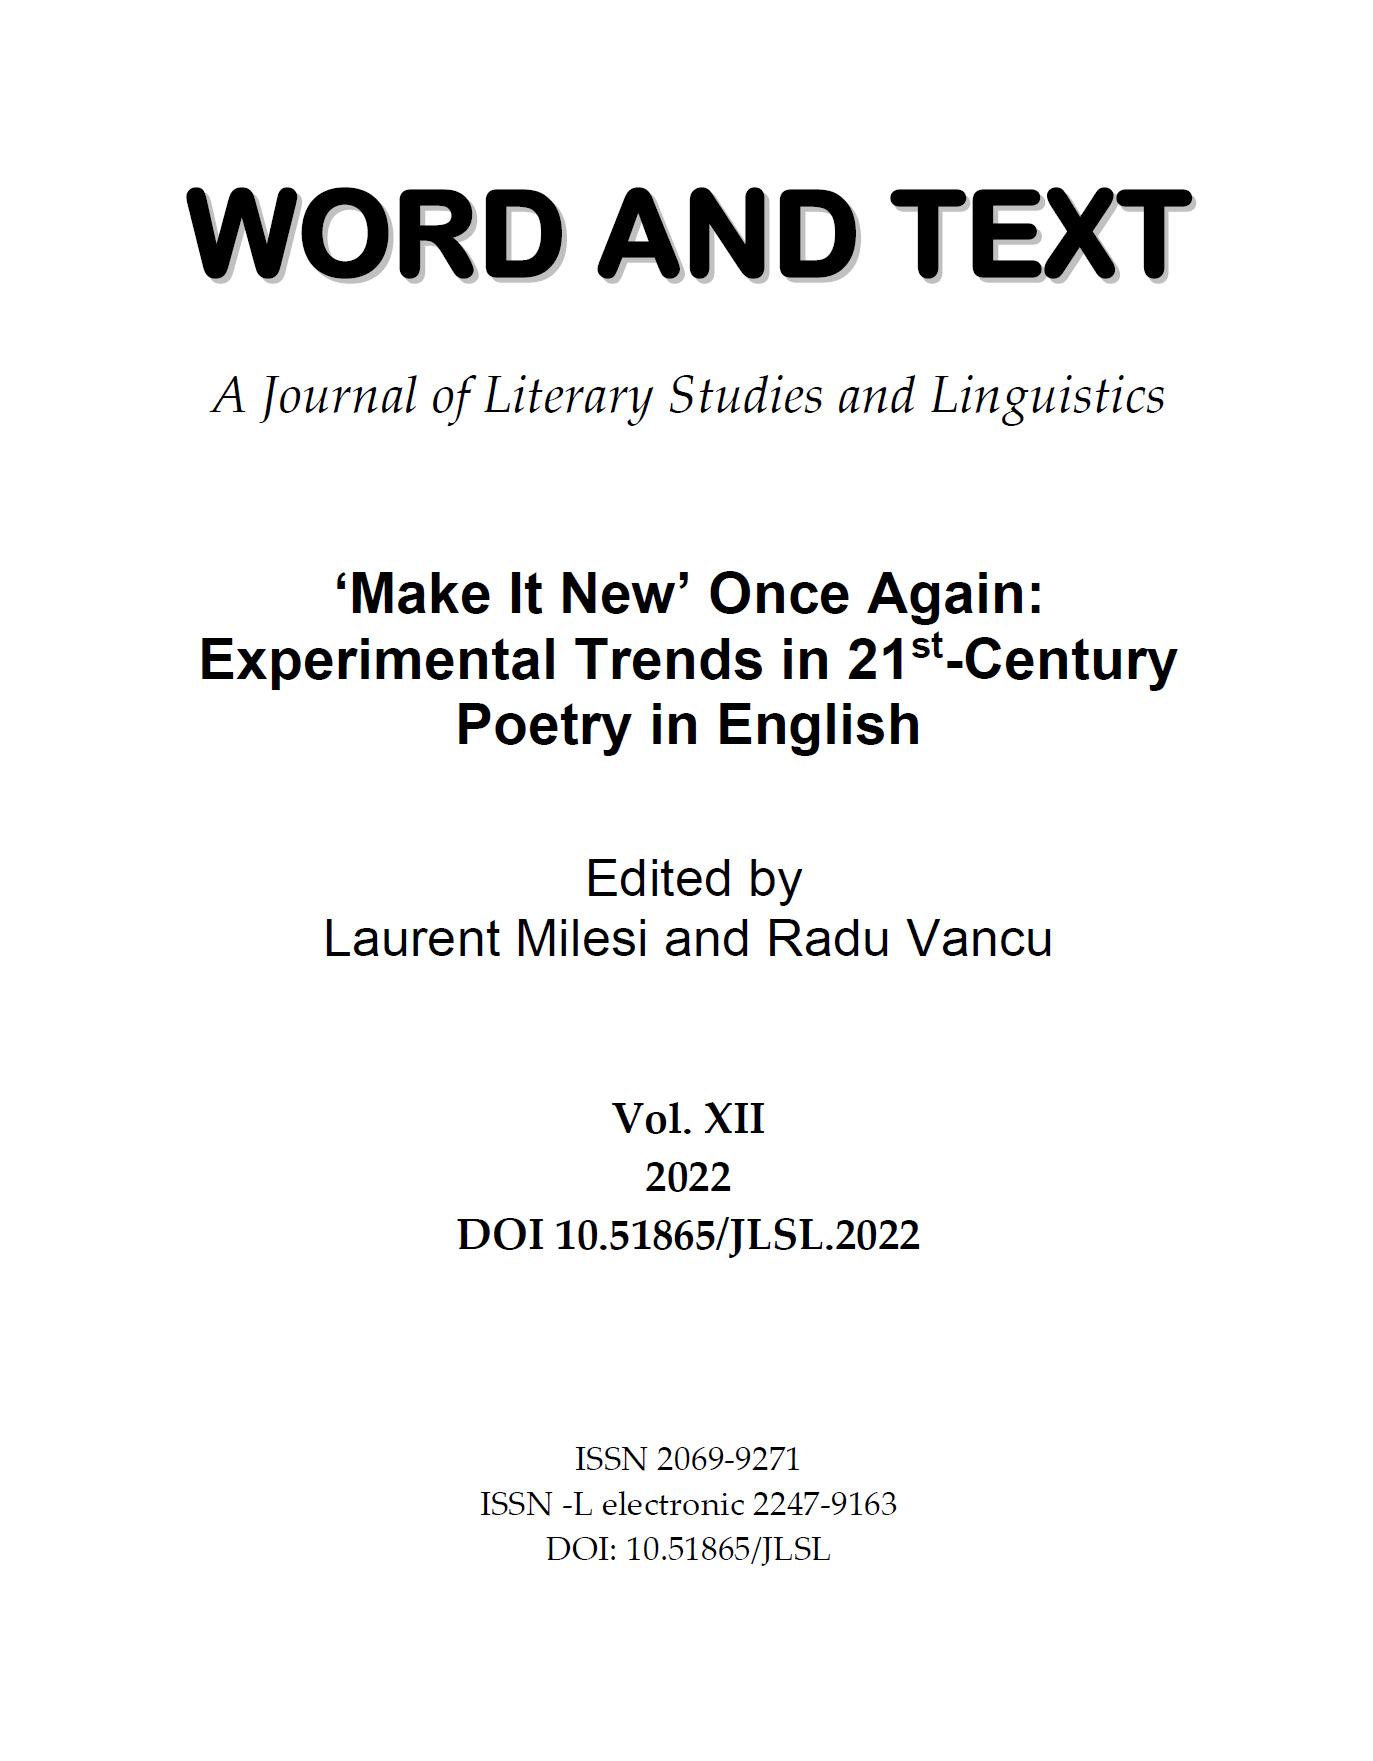 Introduction: ‘Make It New’ Once Again: Experimental Trends in 21st-Century Poetry in English